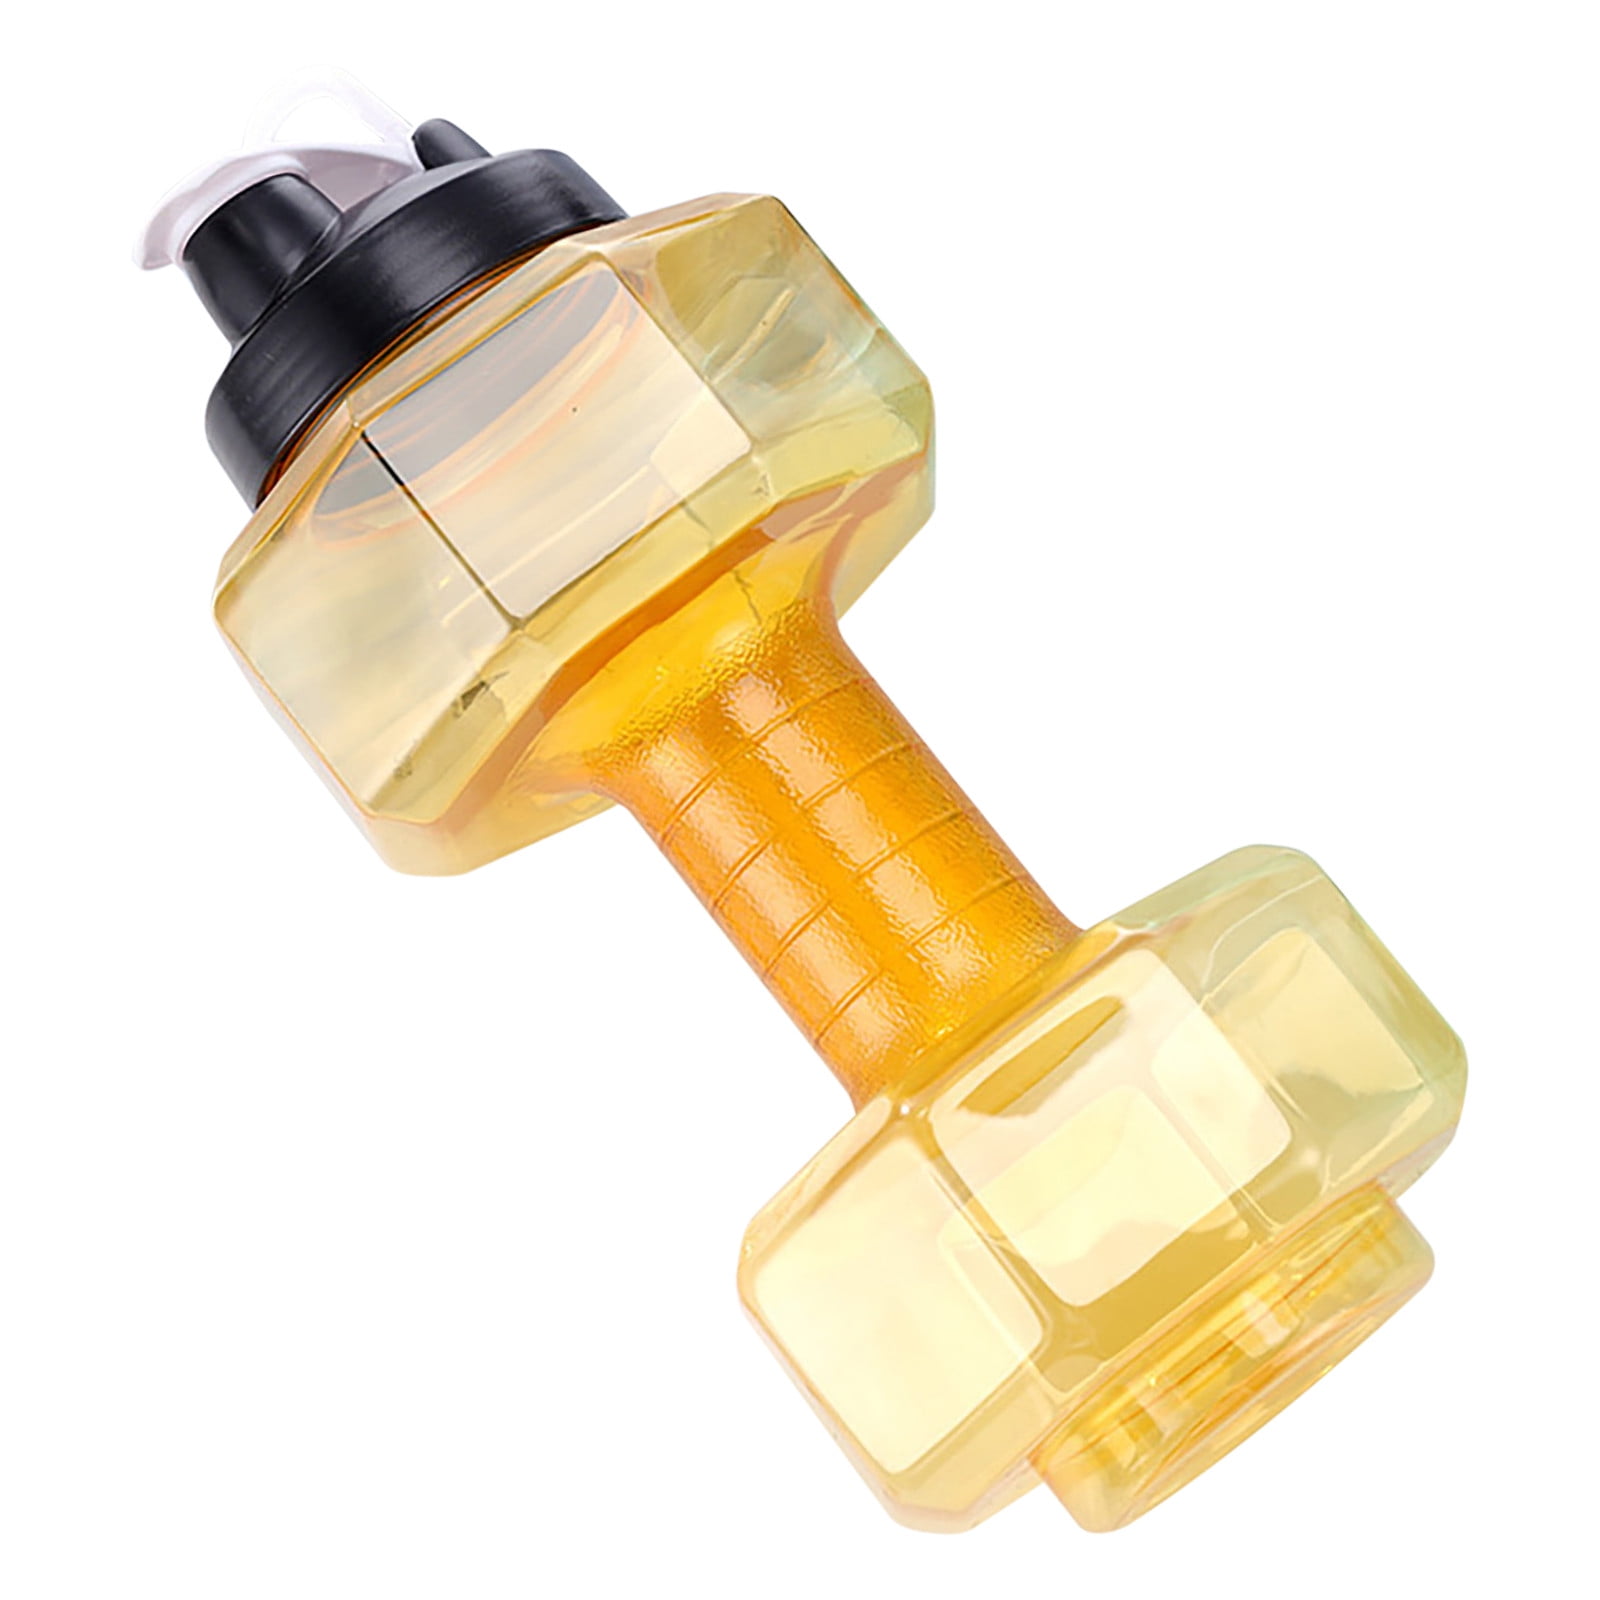 SDJMa Dumbbell Water Bottle, Workout Water Bottle For Women and